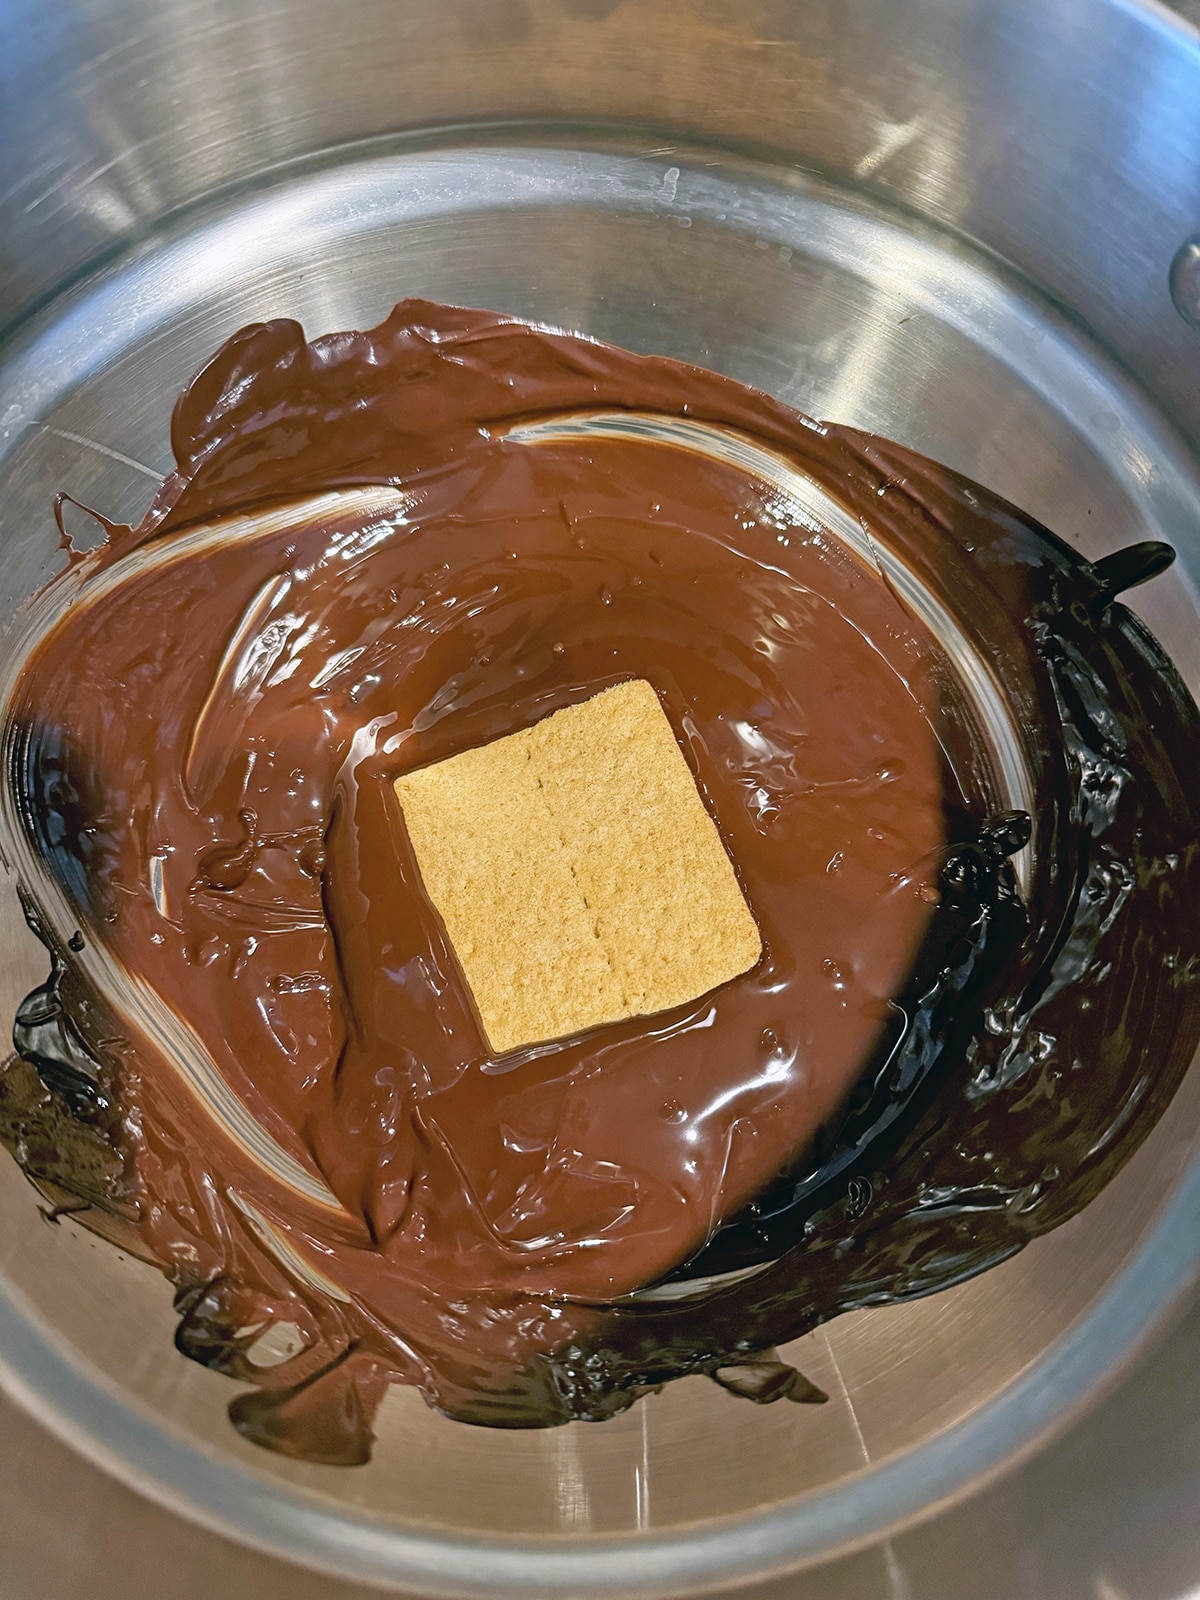 Graham cracker in melted chocolate in double boiler.